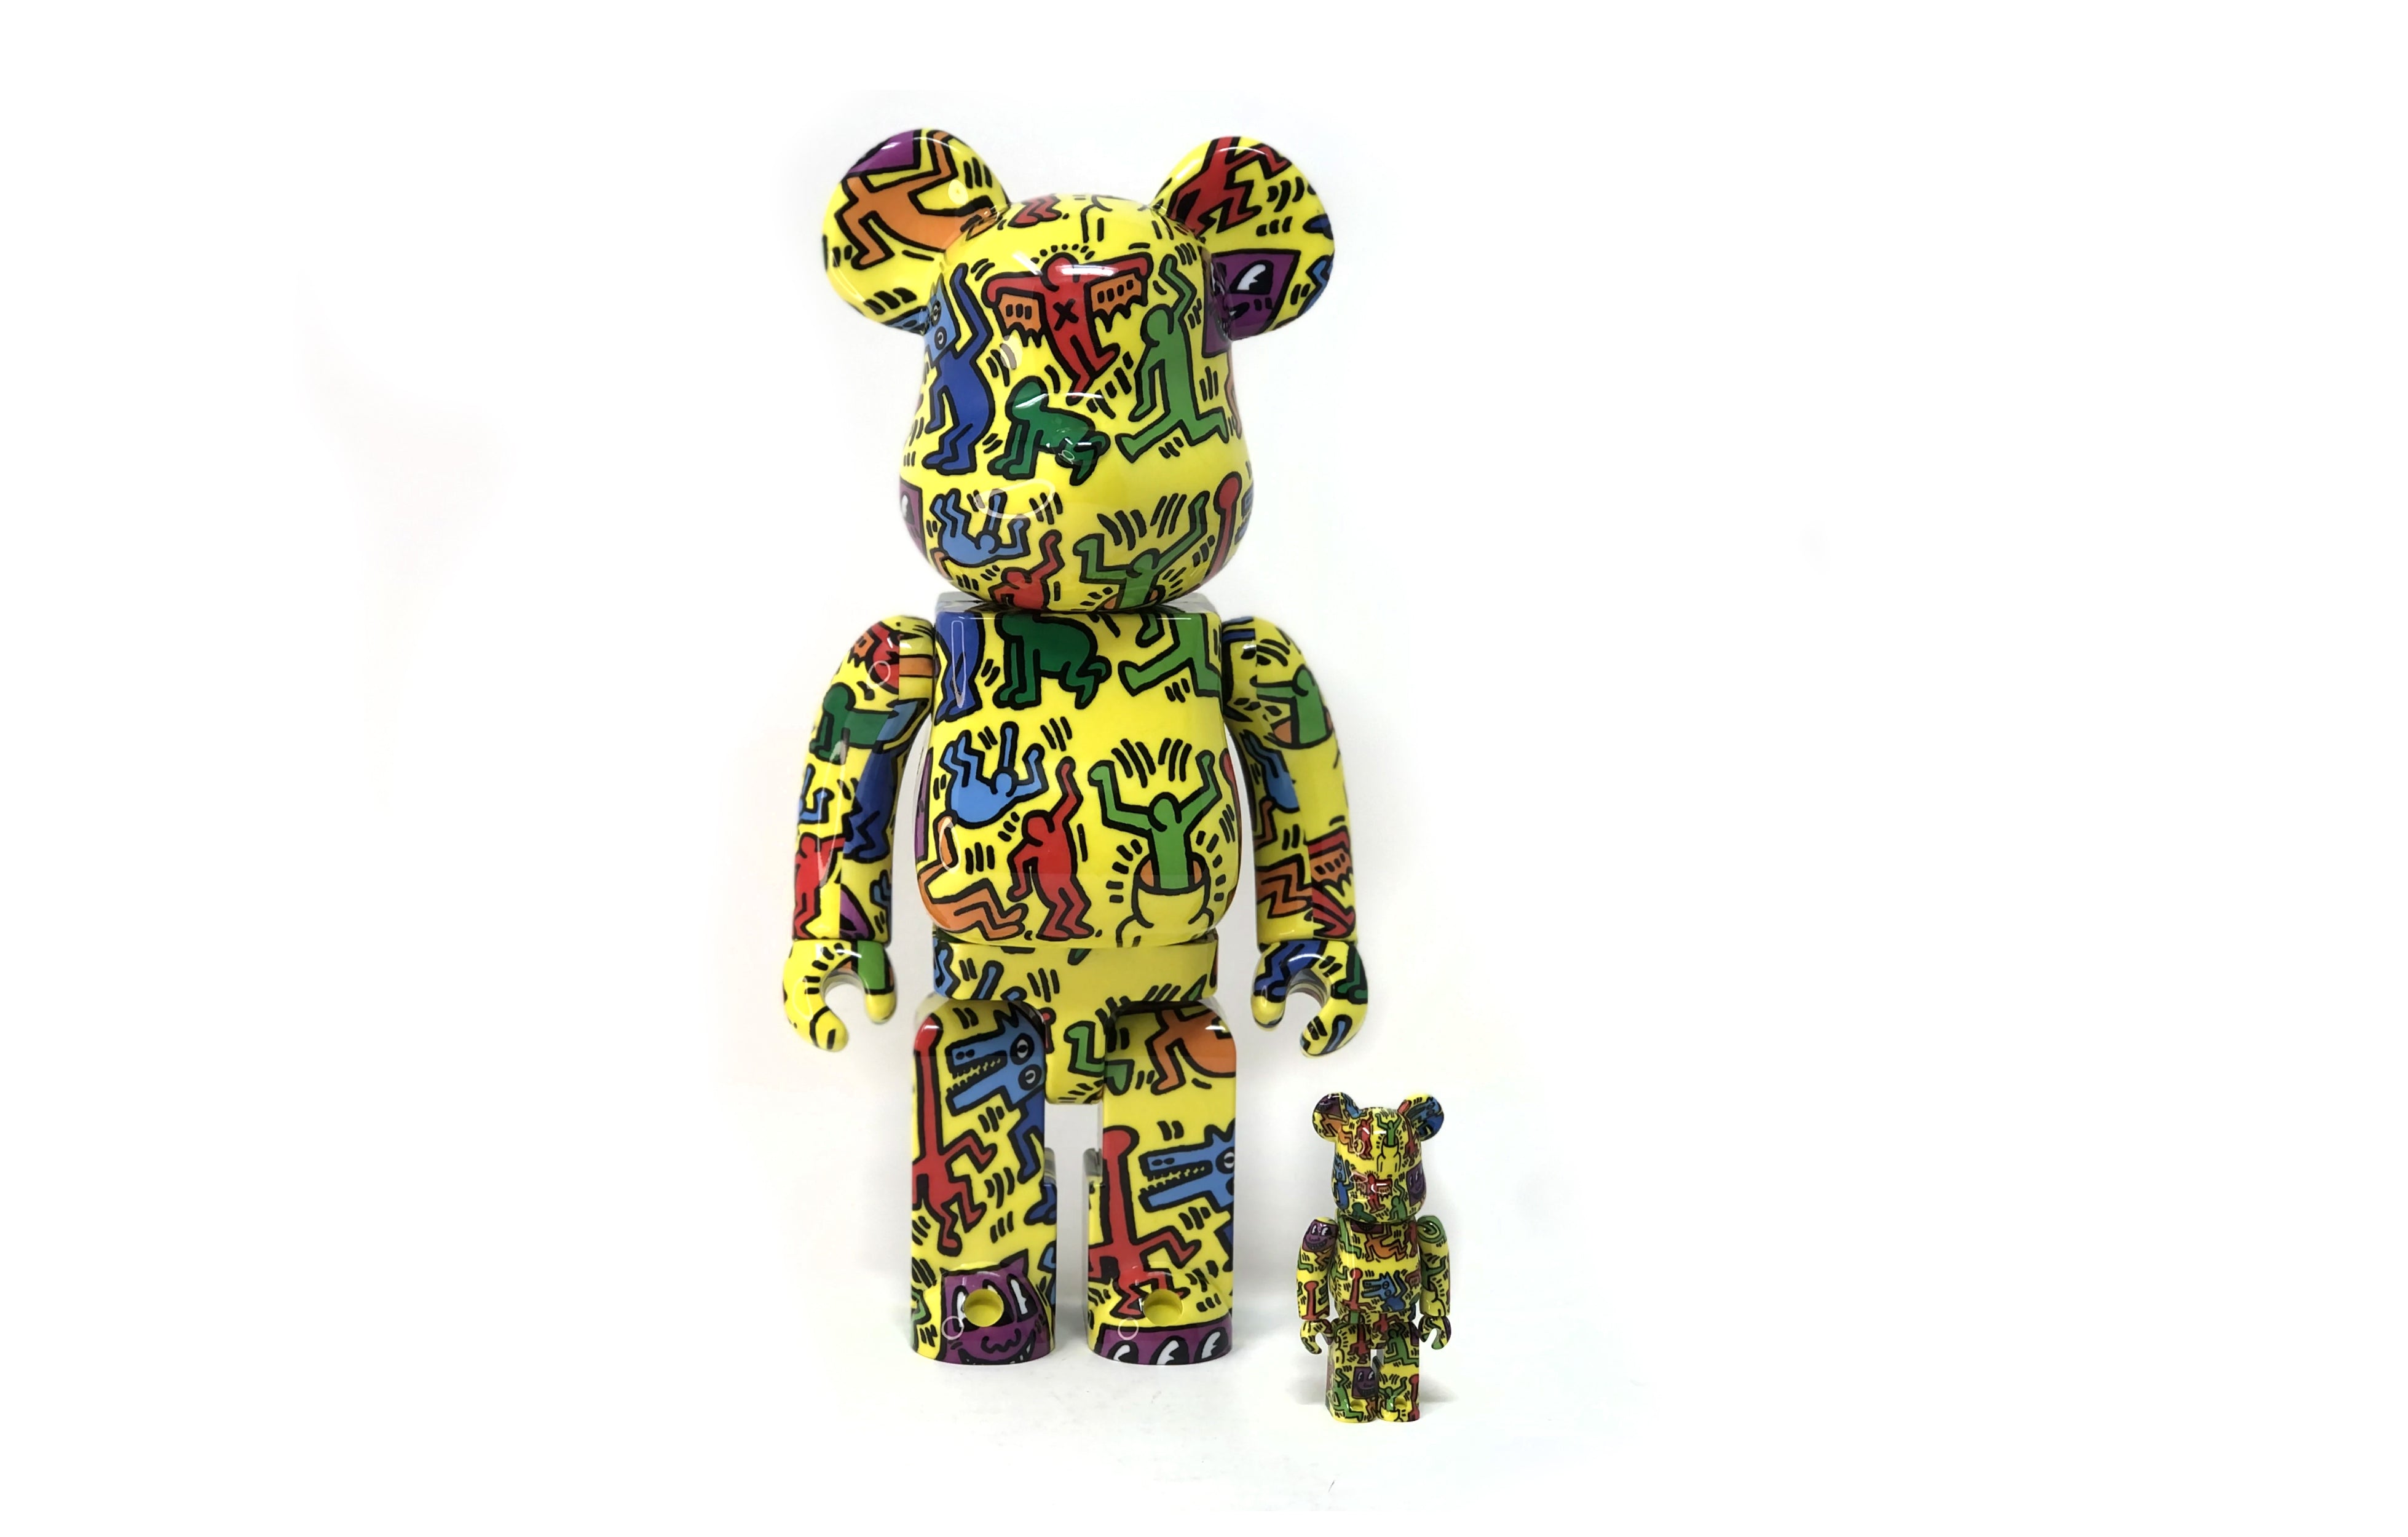 Haring Vol.5 [100% & 400%] by Bearbrick - Galerie F